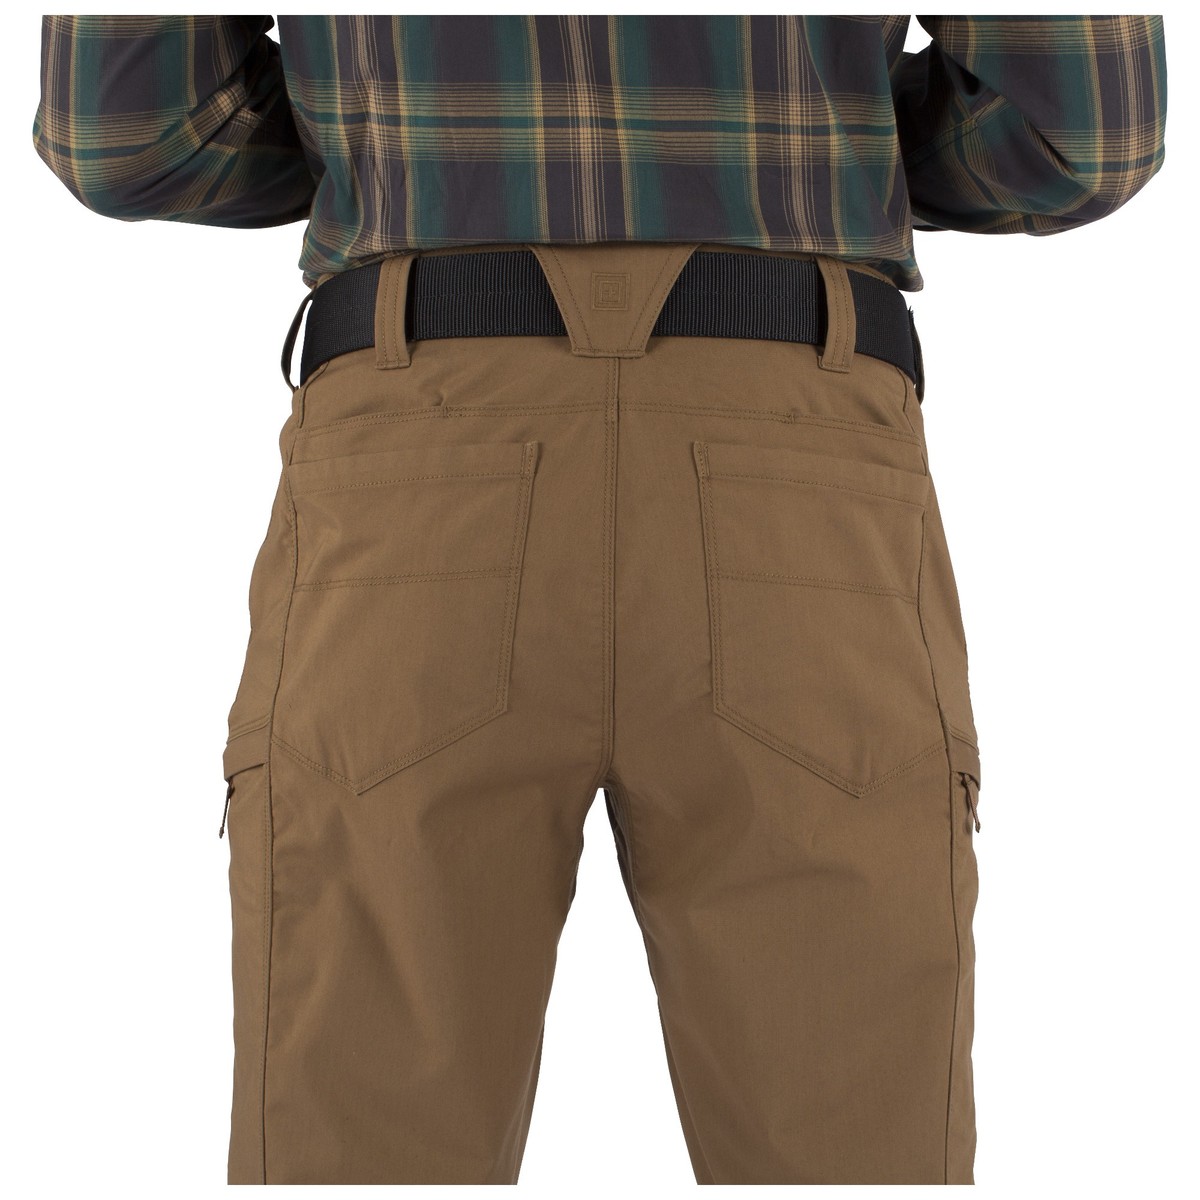 511 APEX PANTS  MENS  STYLE 74434  Fundy Tactical